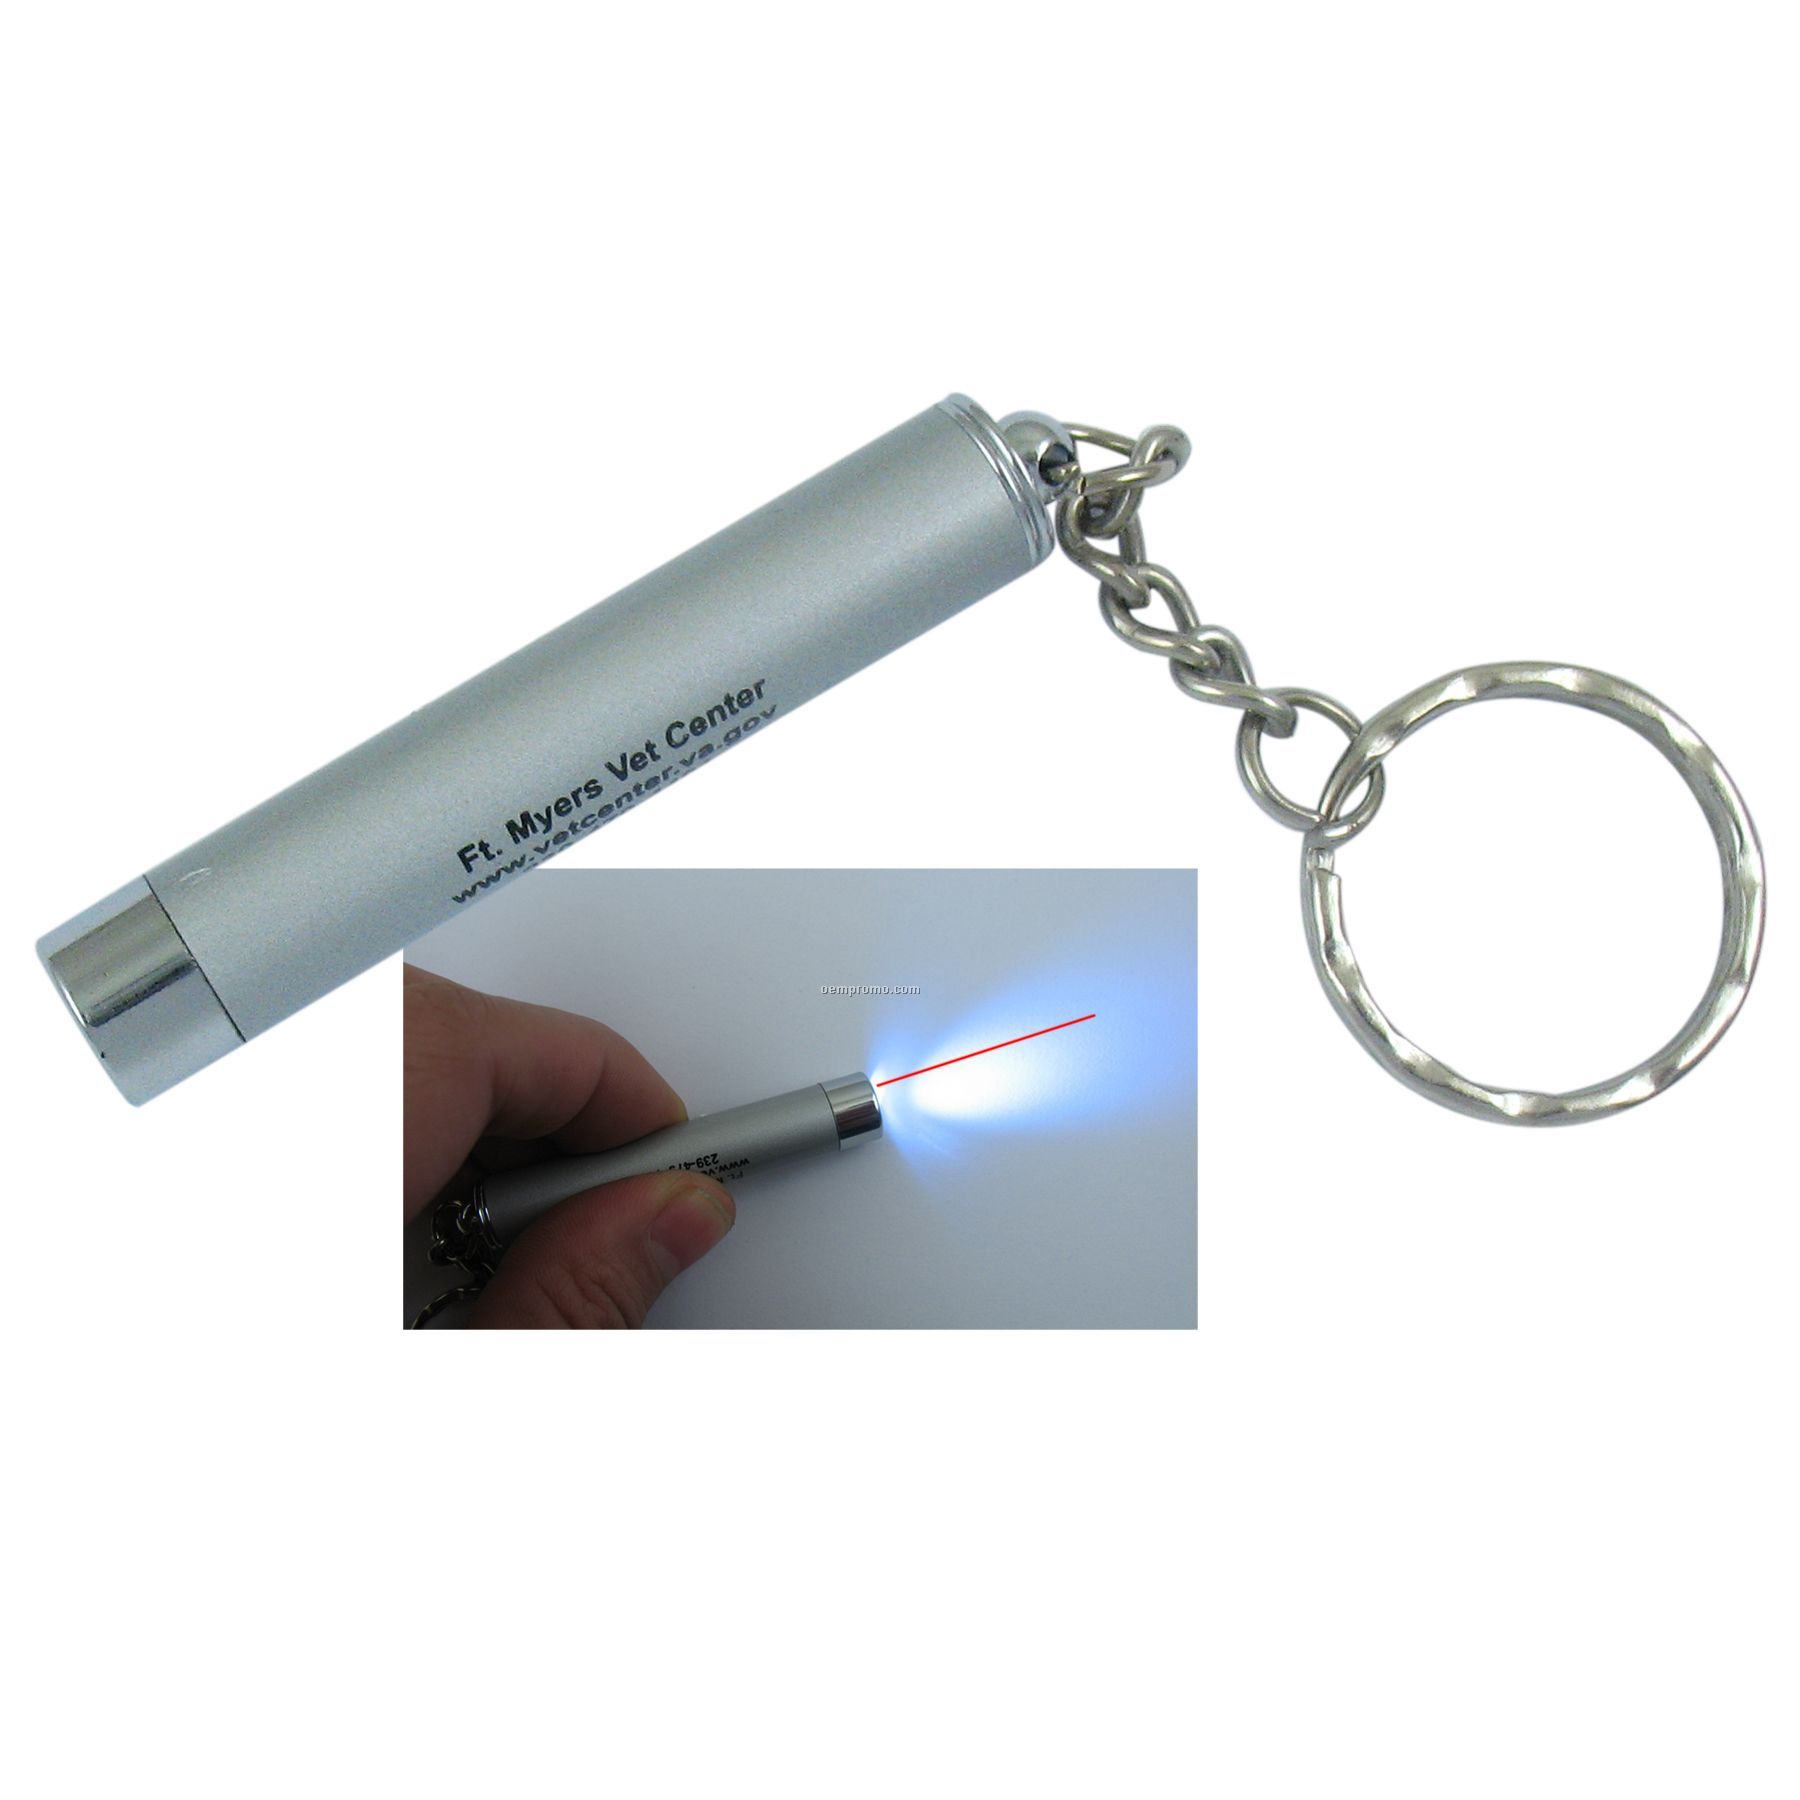 Laser Pointer And LED Light W/ Key Chain